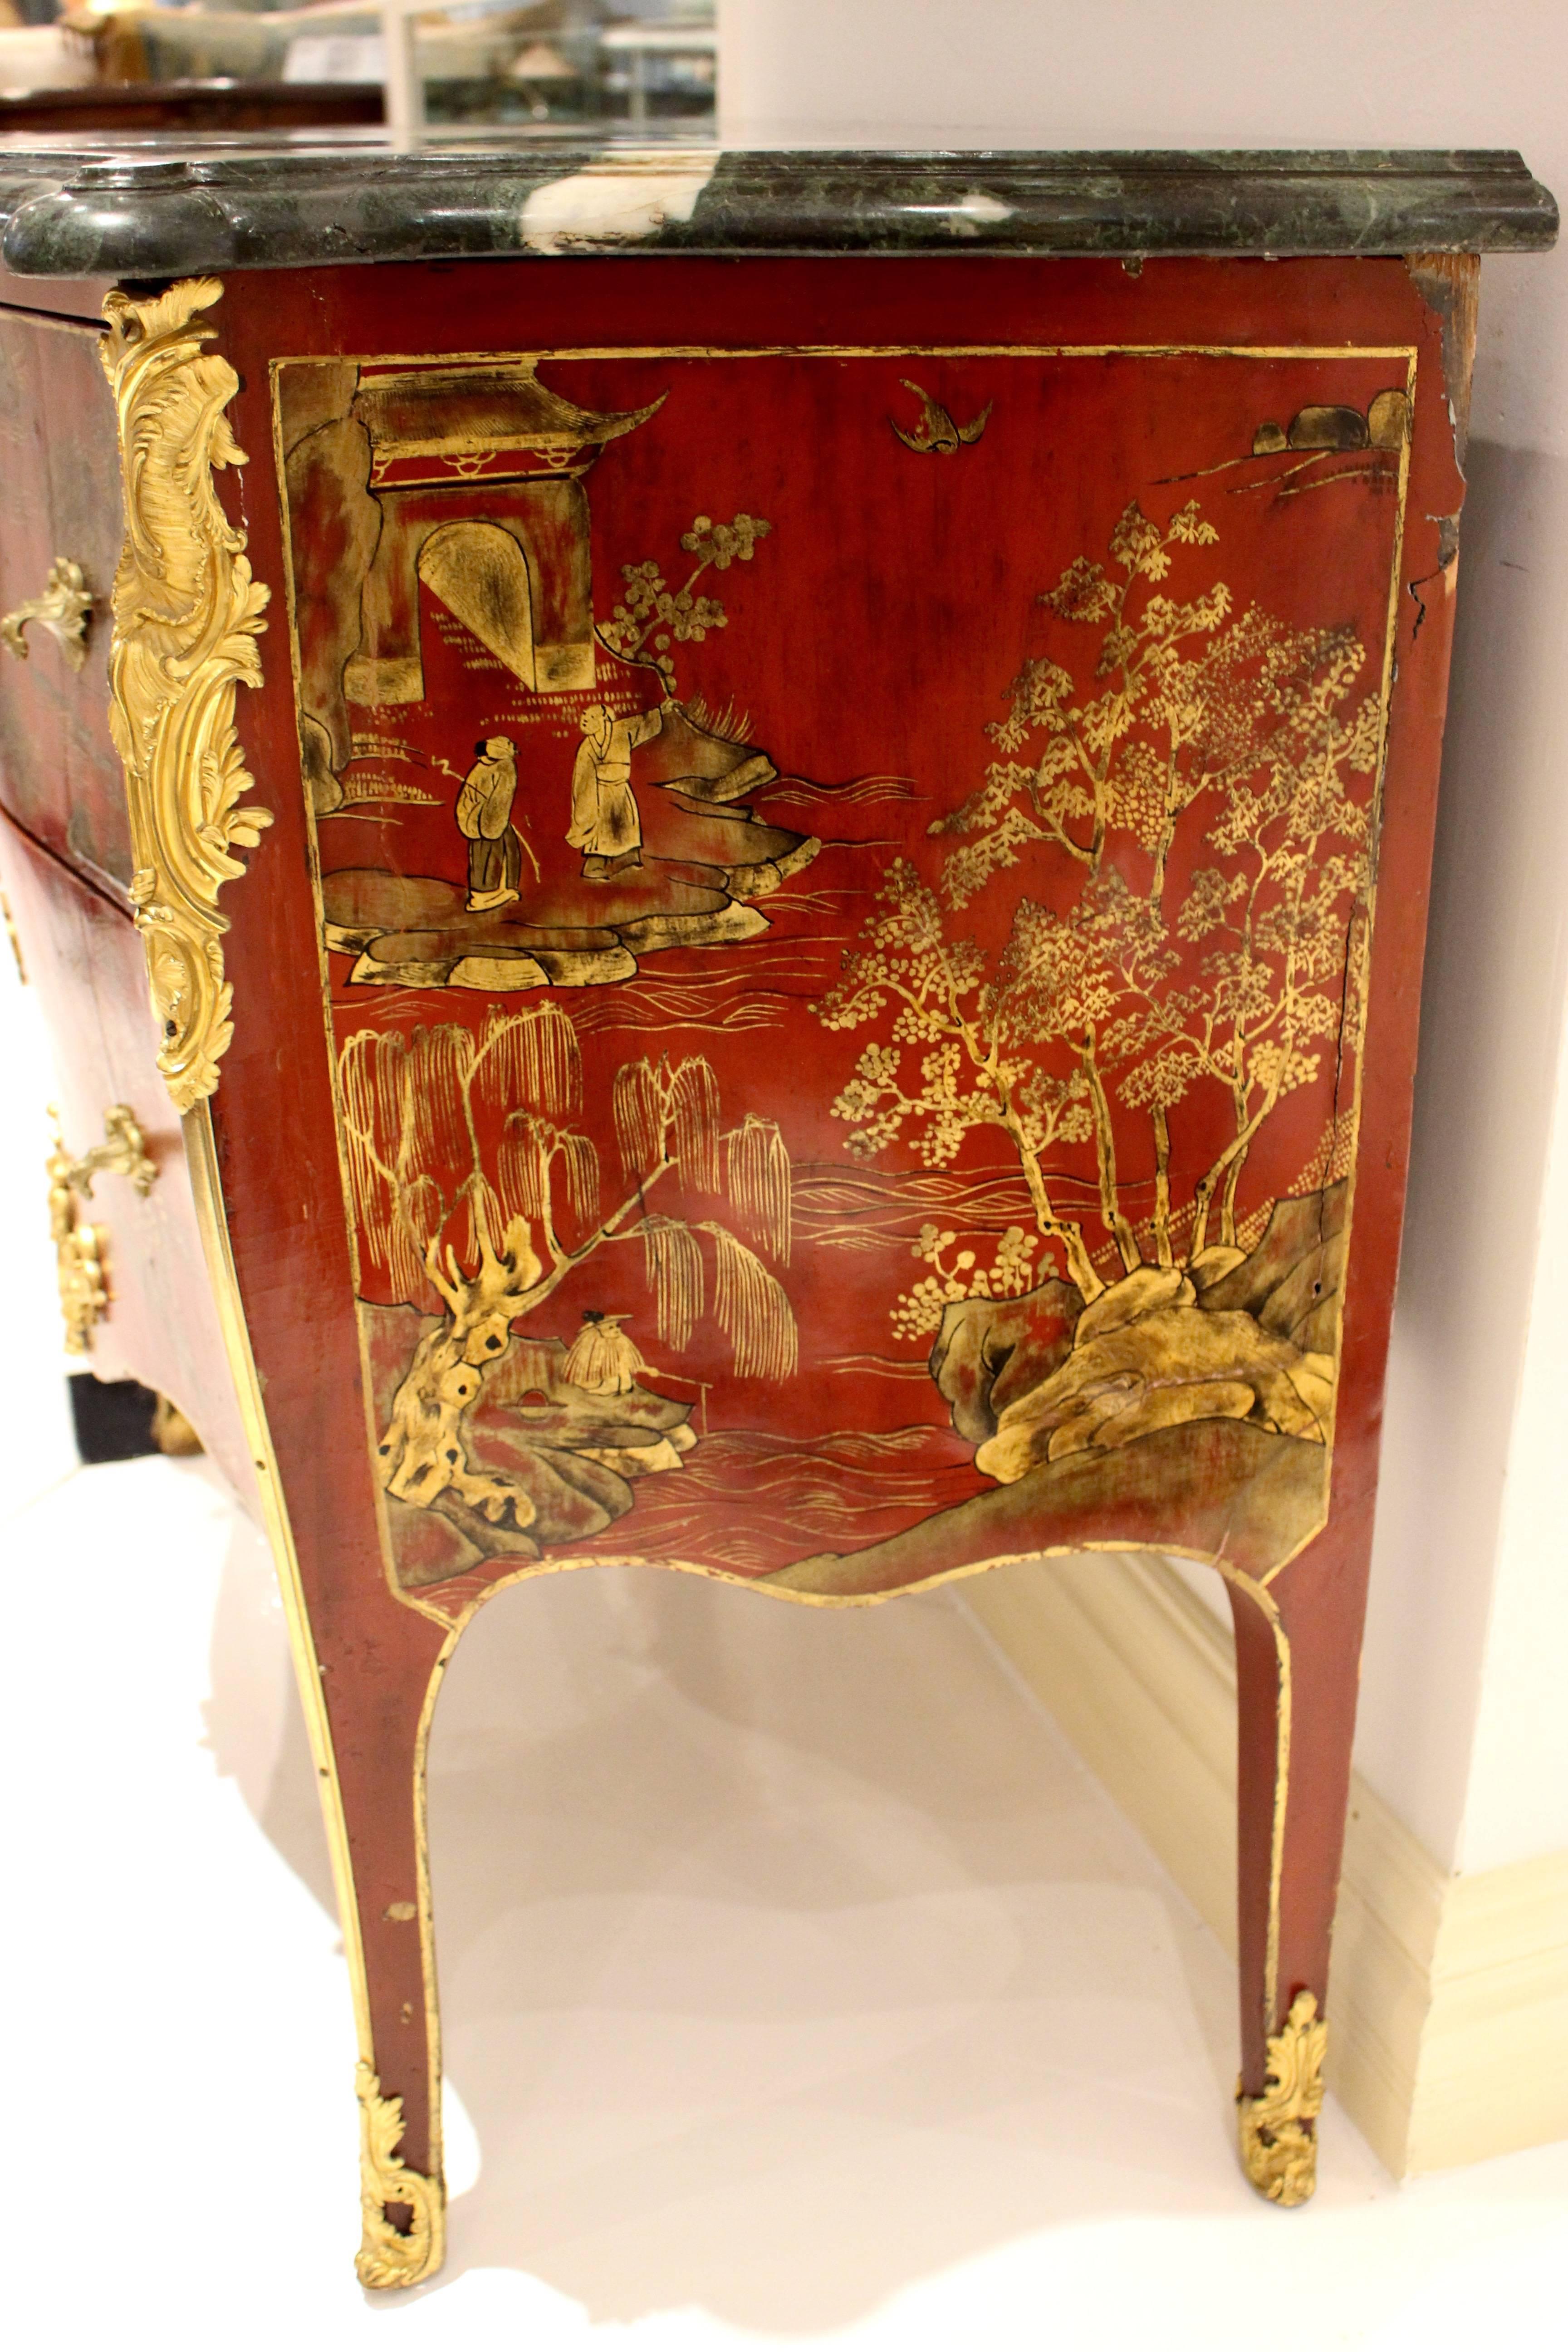 Gilt Louis XV Style Early 19th Century Red Lacquer Commode with Chinoiseries Scenes